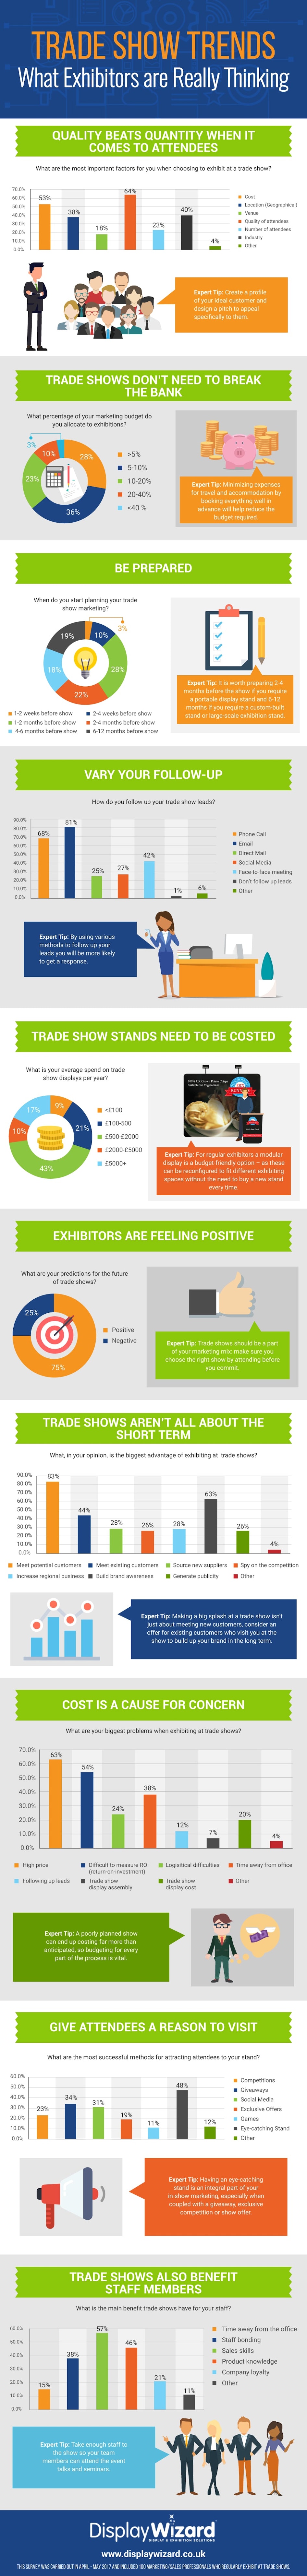 Trade Show Exhibitor Report Infographic